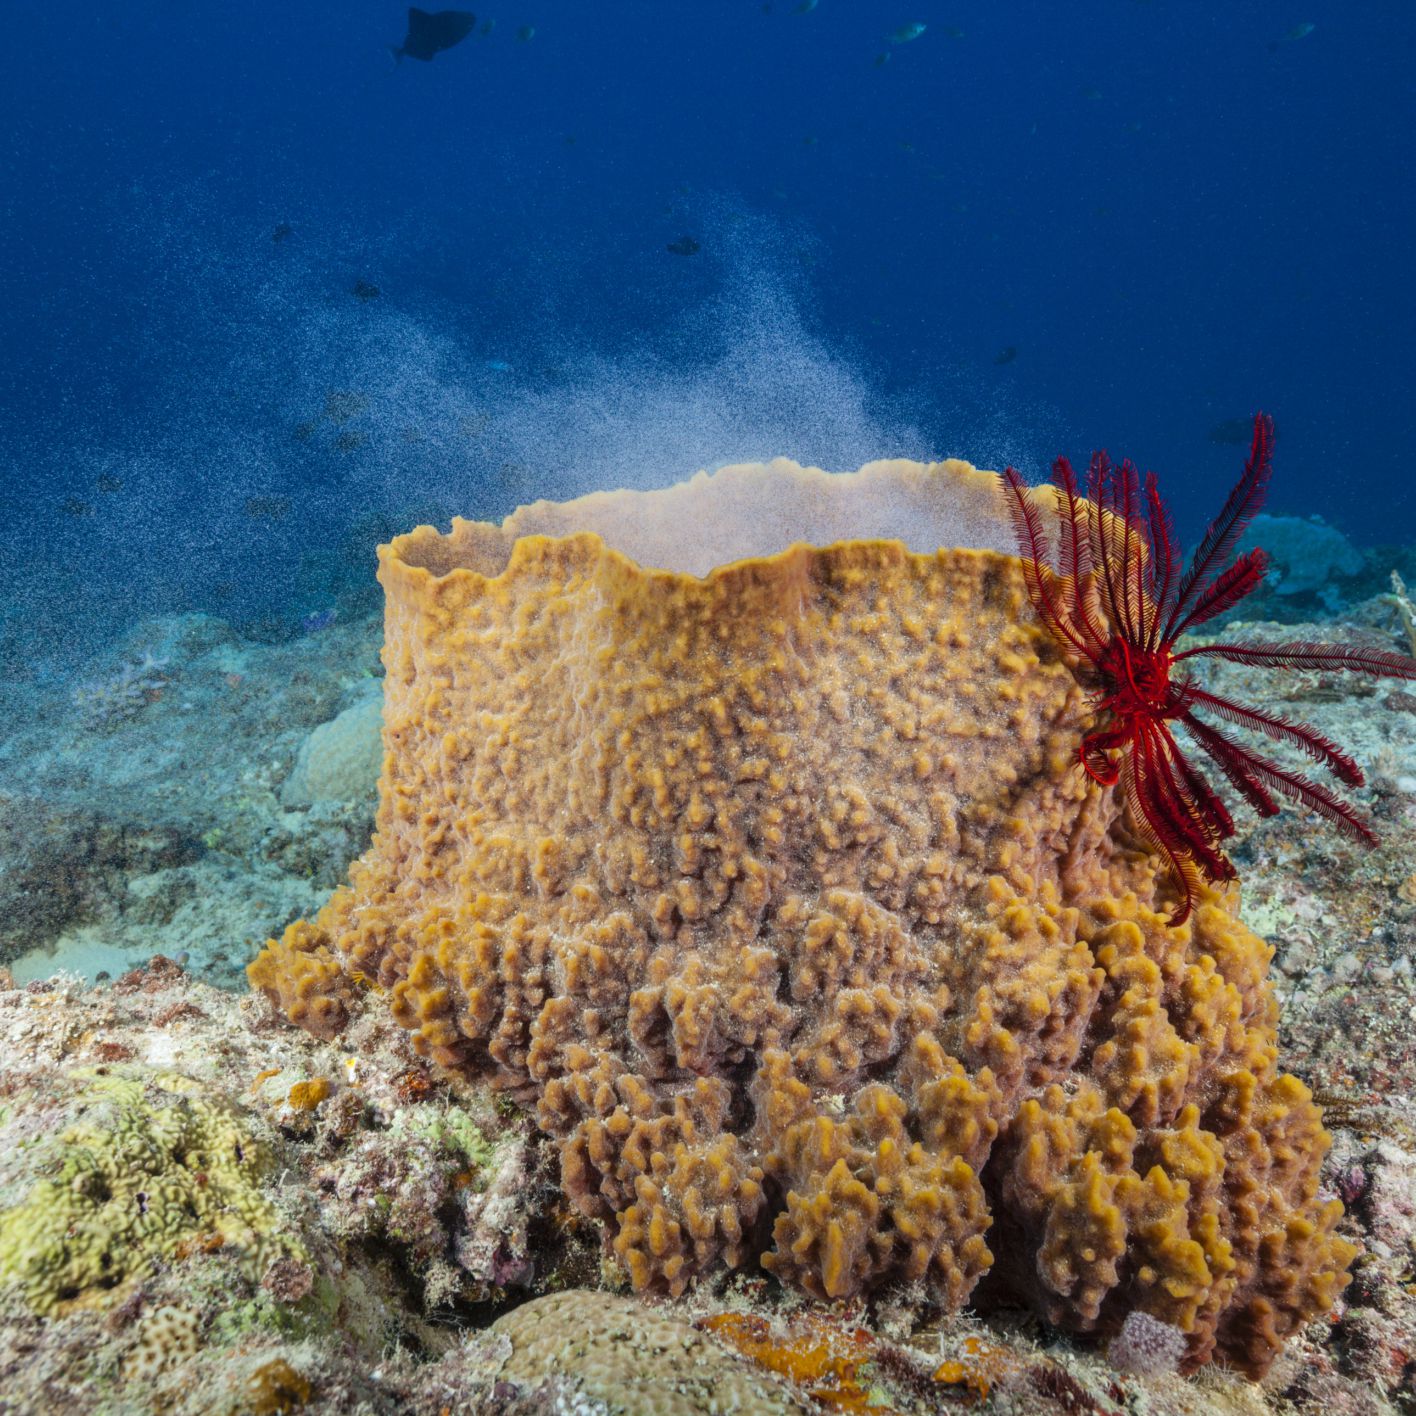 Where are sponges found in the ocean?